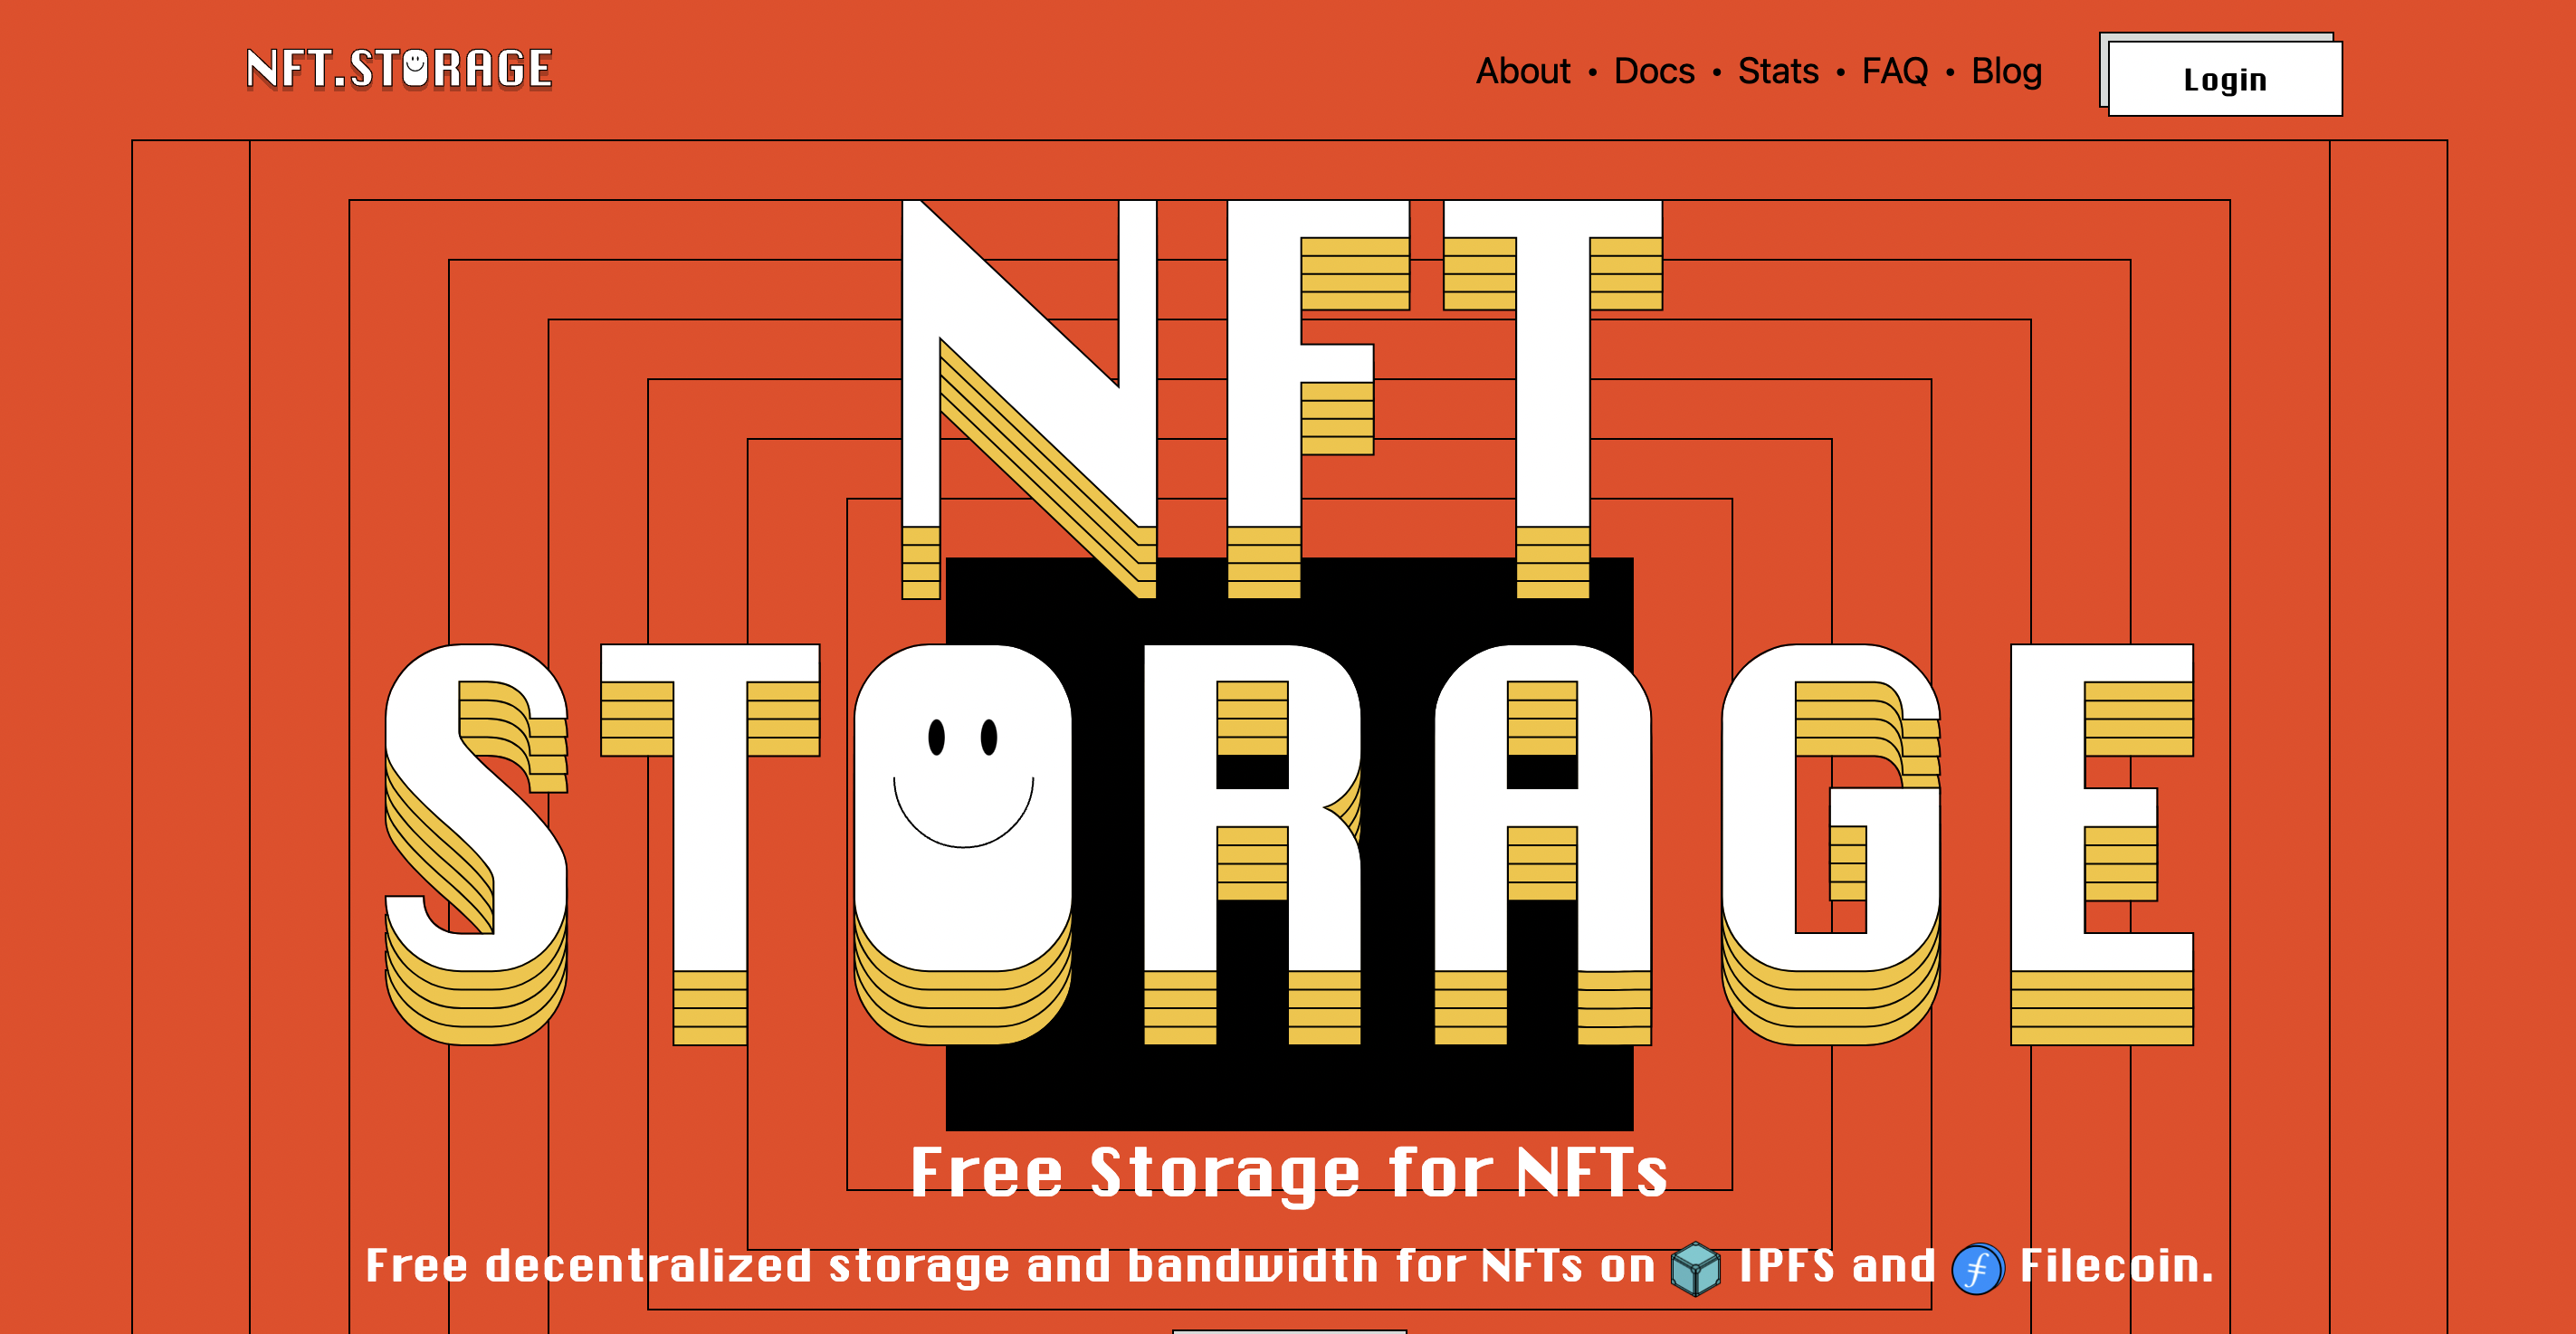 NFT.Storage offers free decentralized storage for NFTs via IPFS and Filecoin.